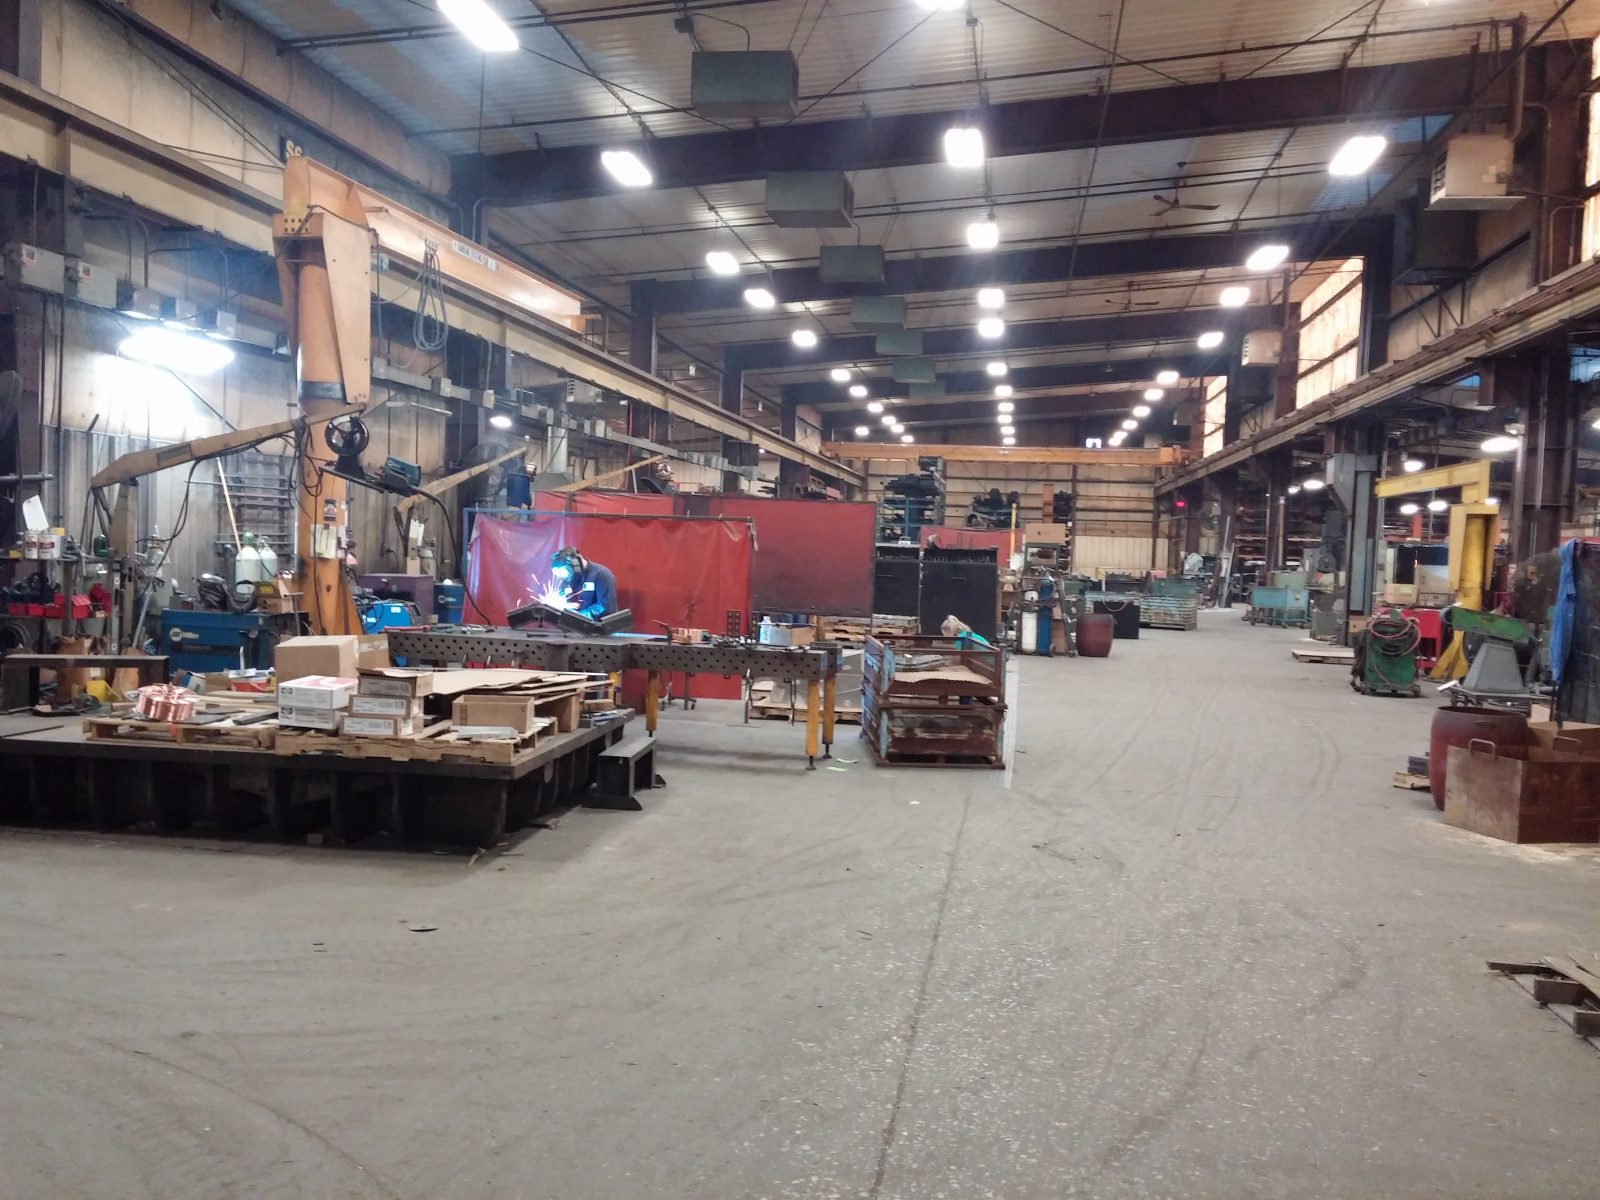 Main fabrication warehouse with worker welding